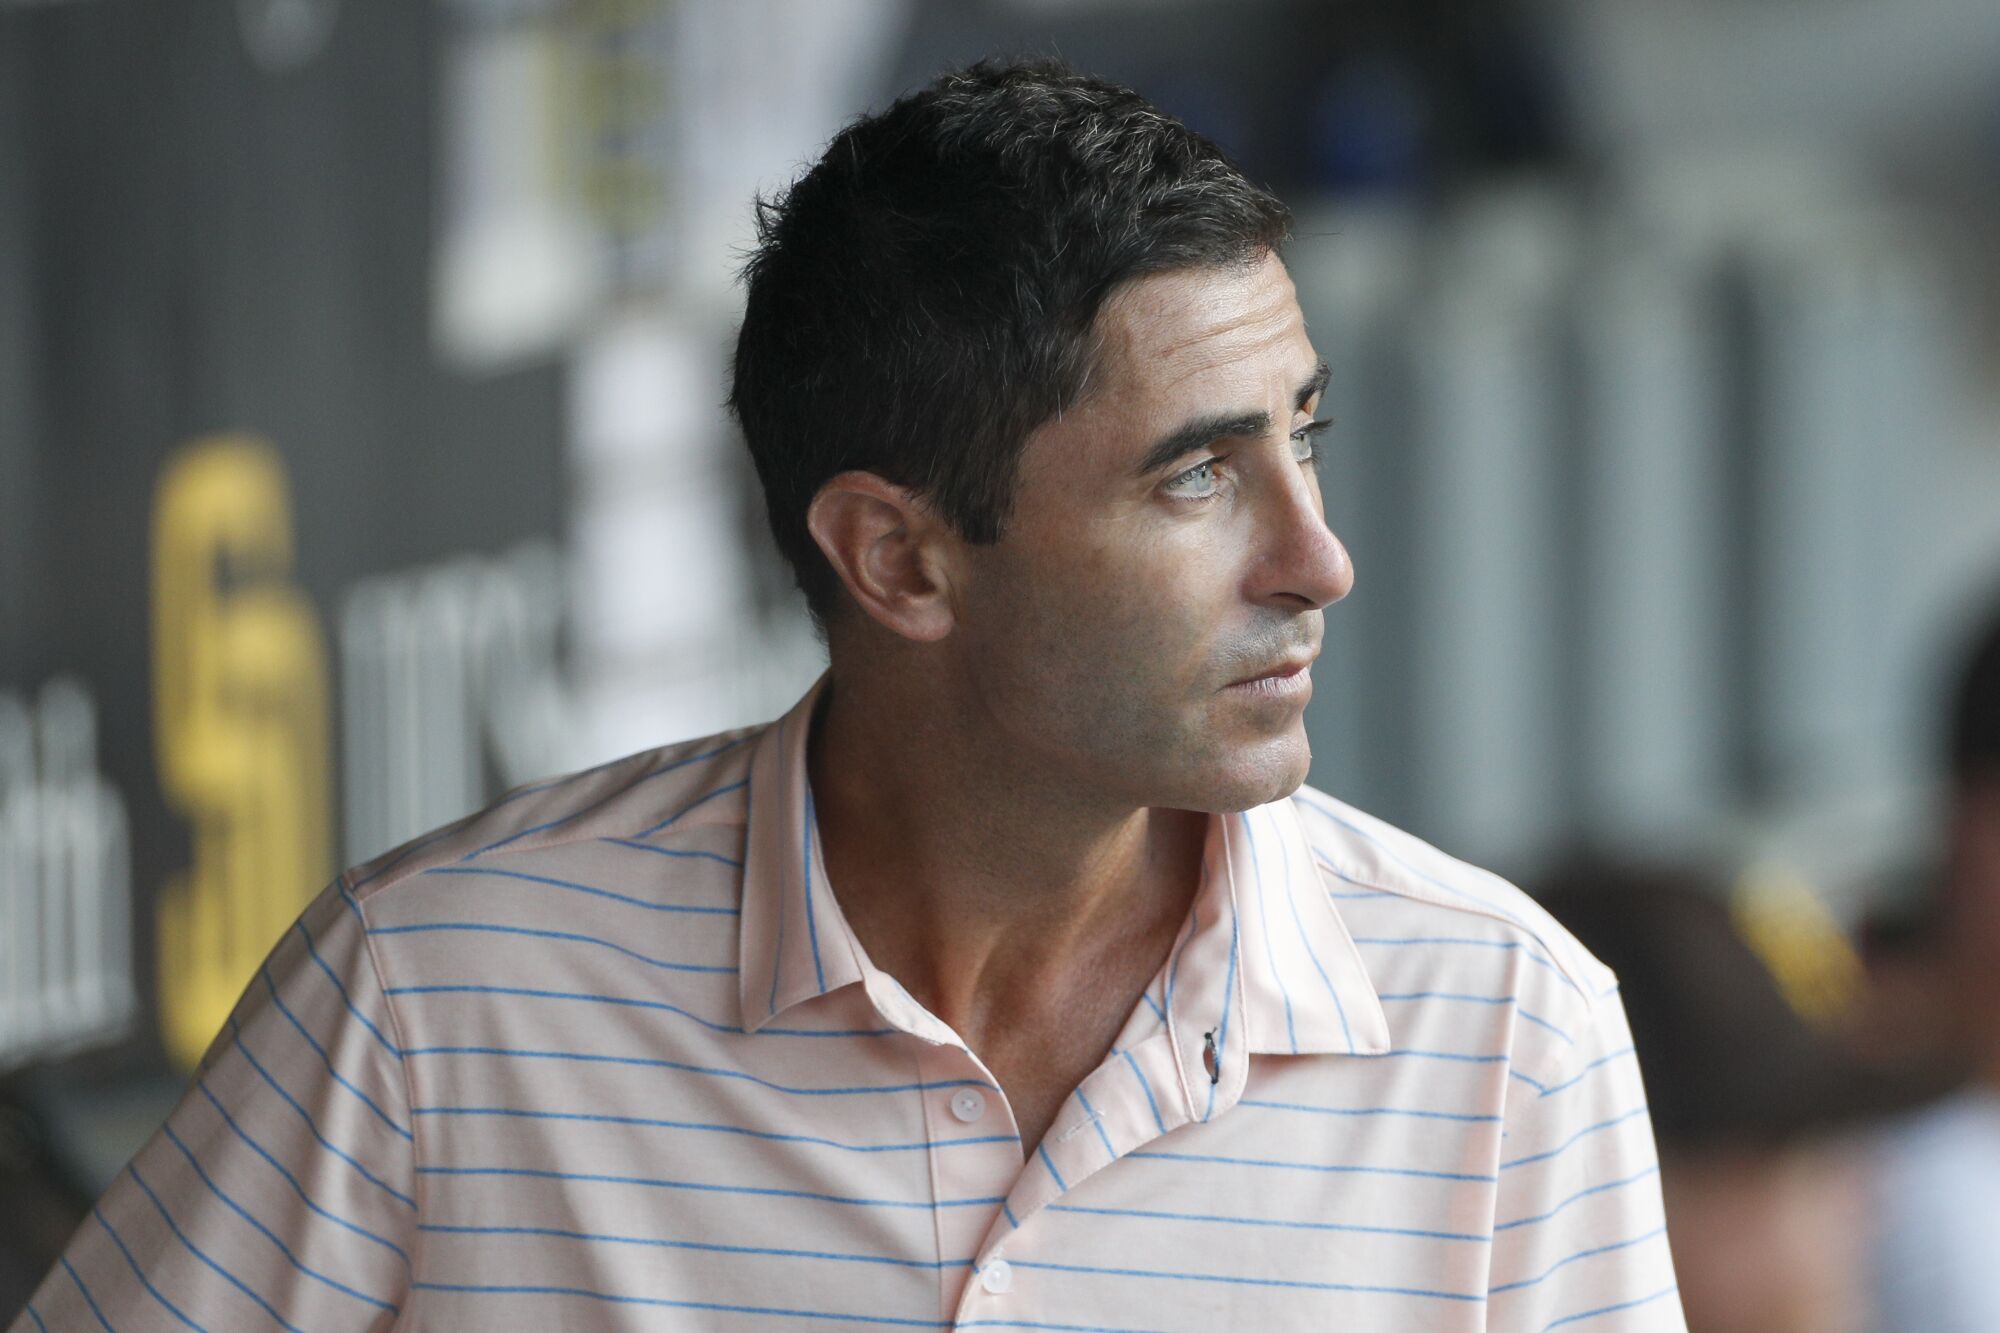 San Diego Padres' general manager A.J. Preller looks on prior to a Sept. 6 game against the Diamondbacks.